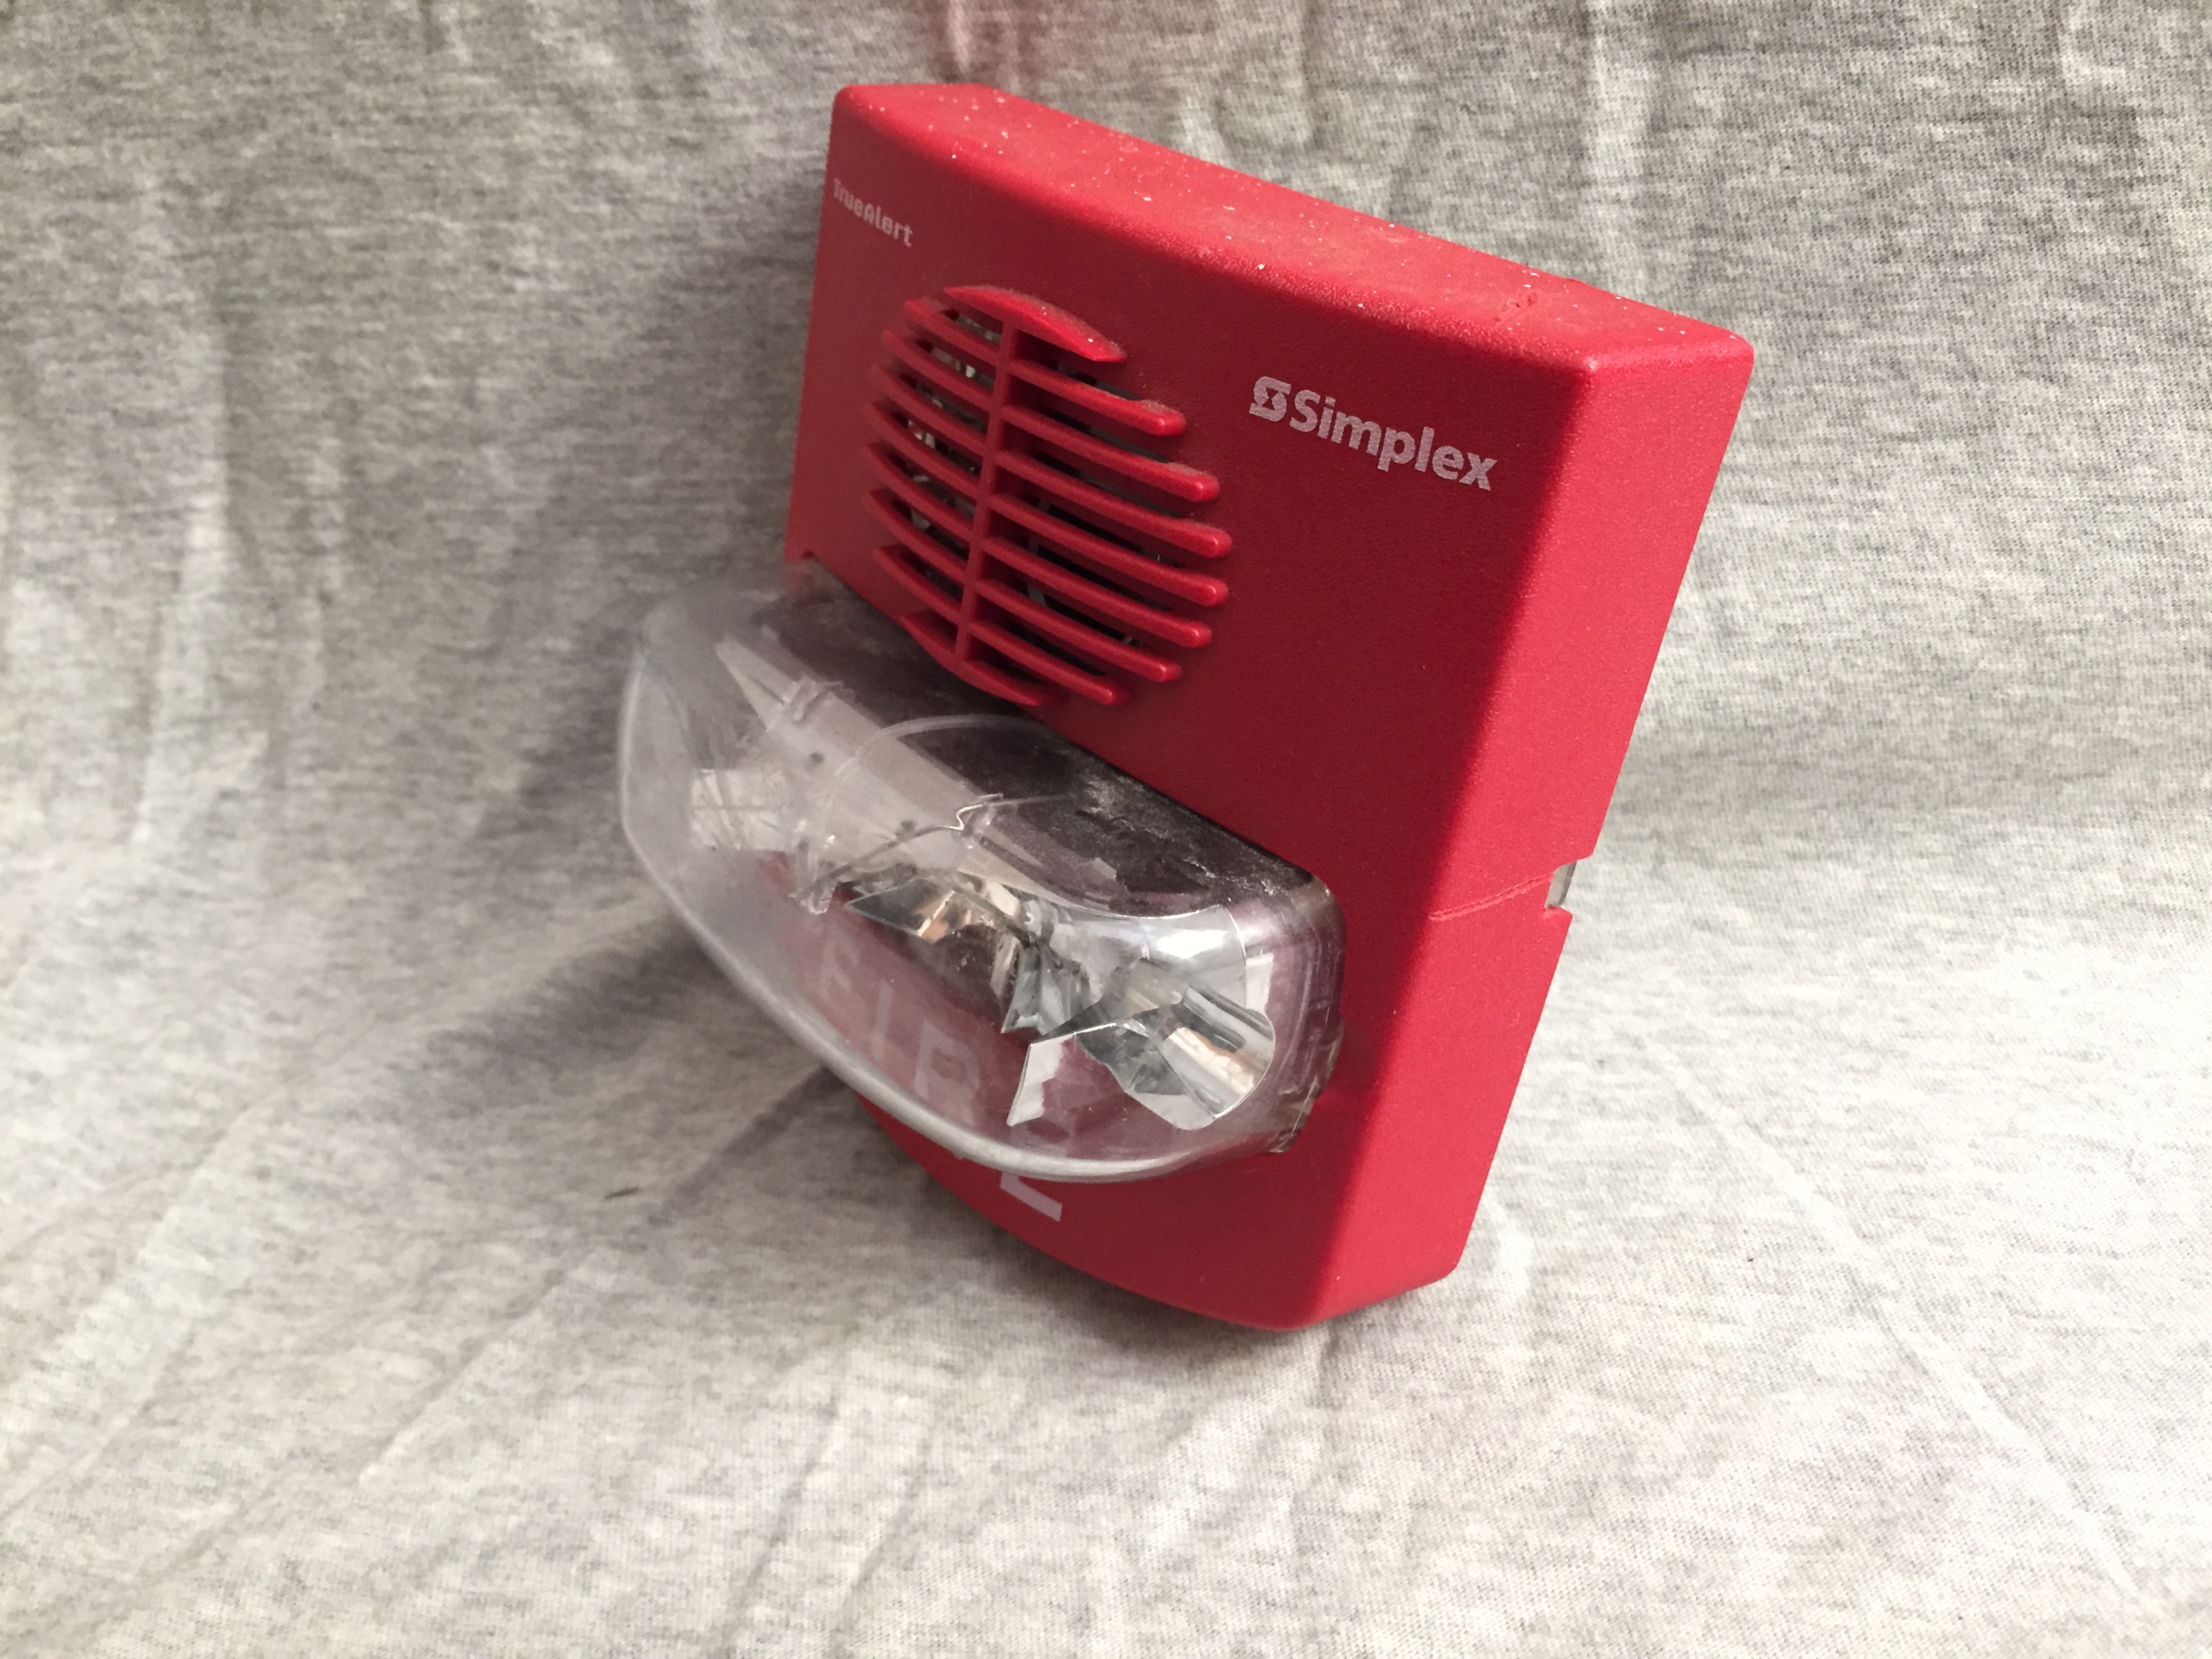 Simplex 4903-9417 - Fire Alarm Collection, Information, Pictures, and ...